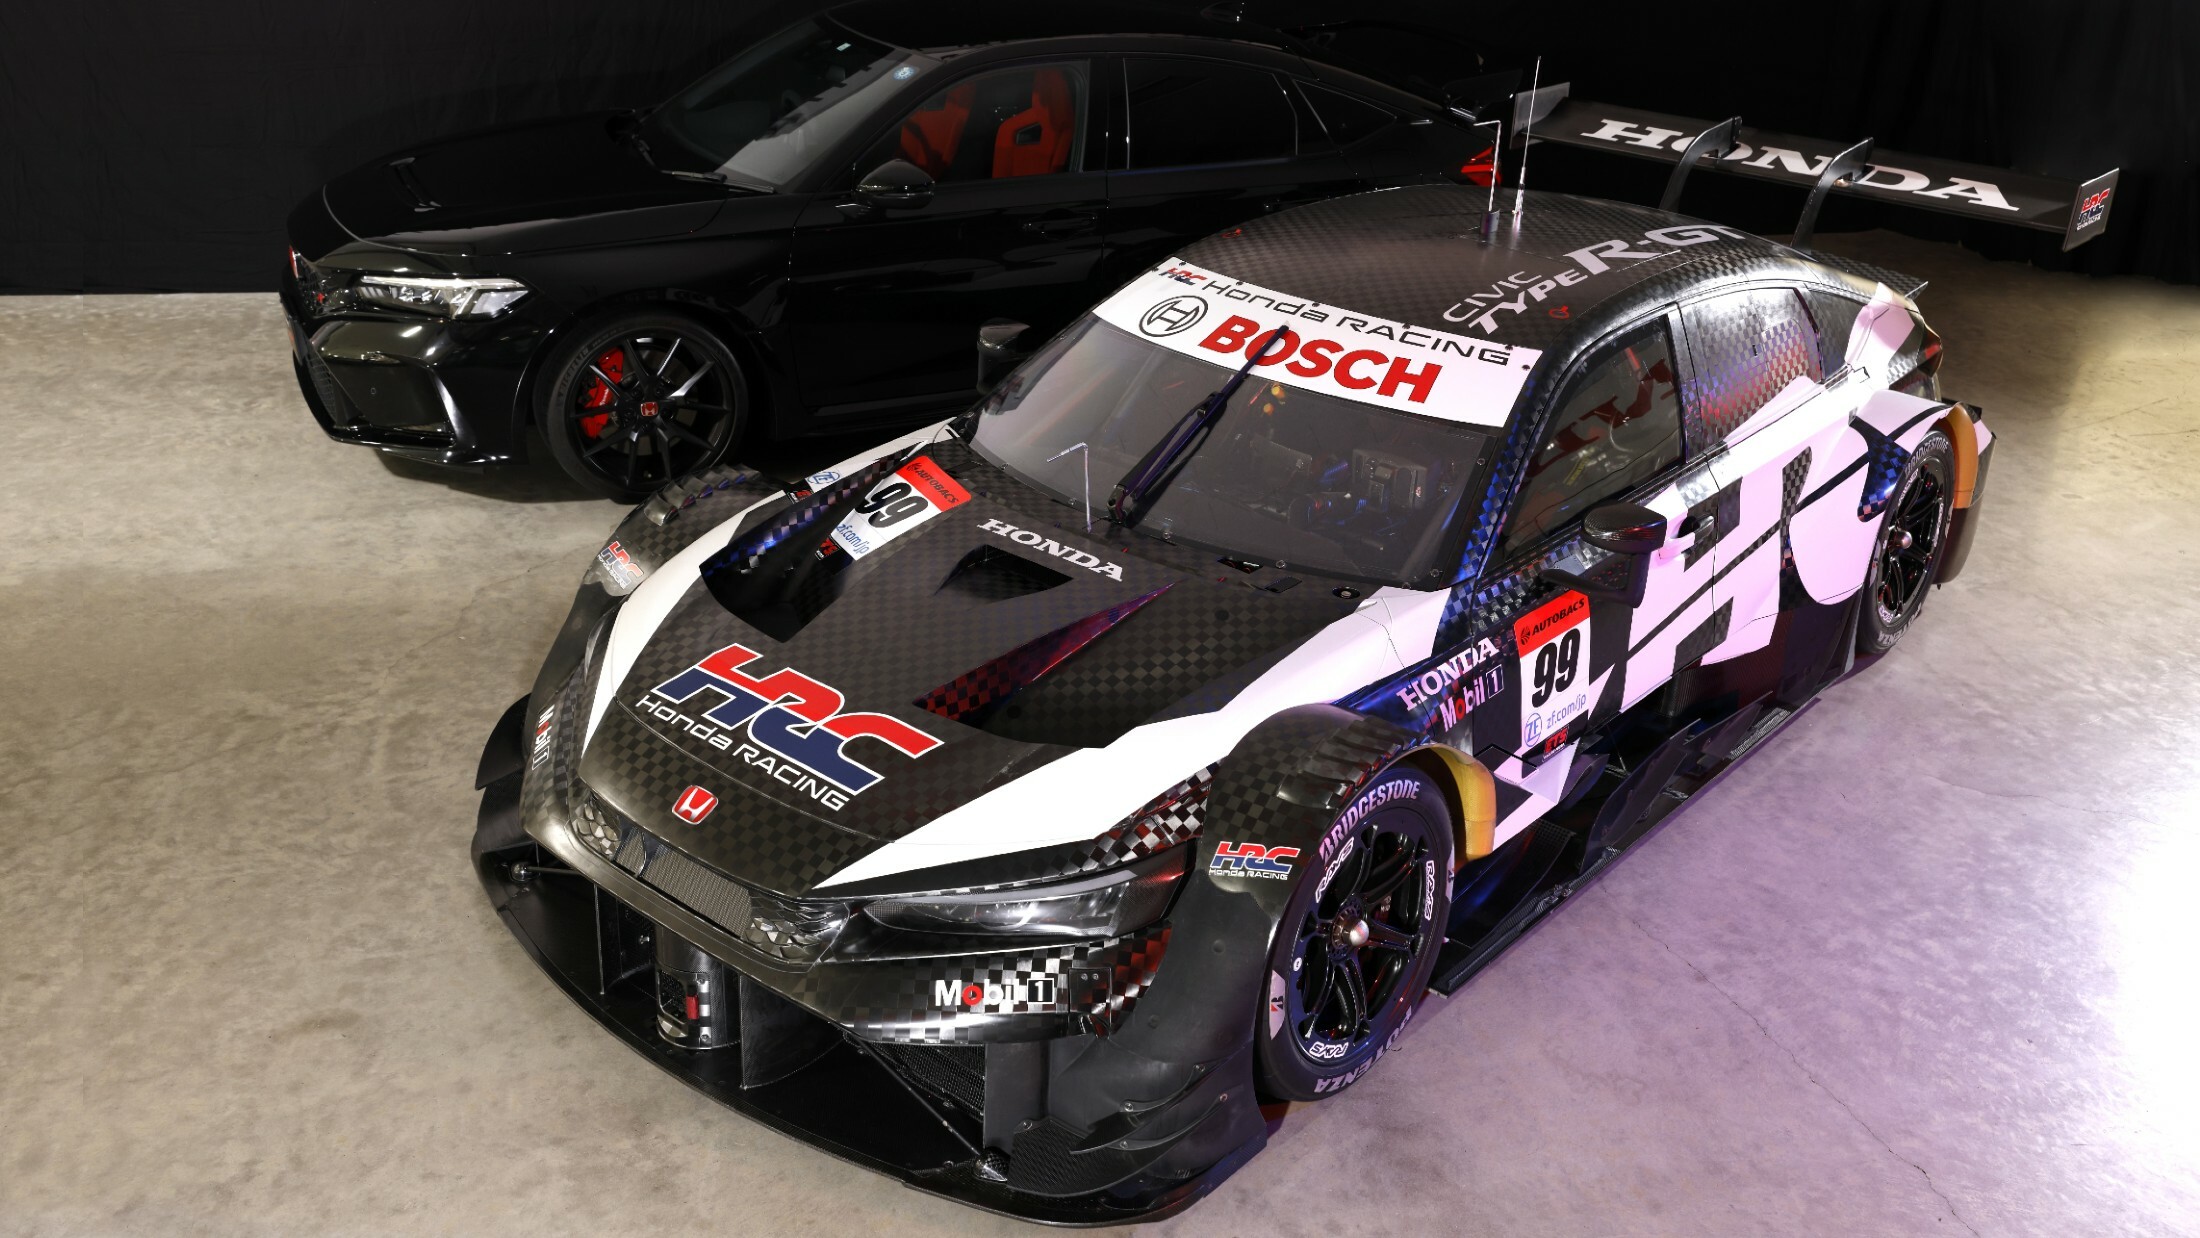 Honda Civic Type R-GT Racecar Gets Ready For First Shakedown Test